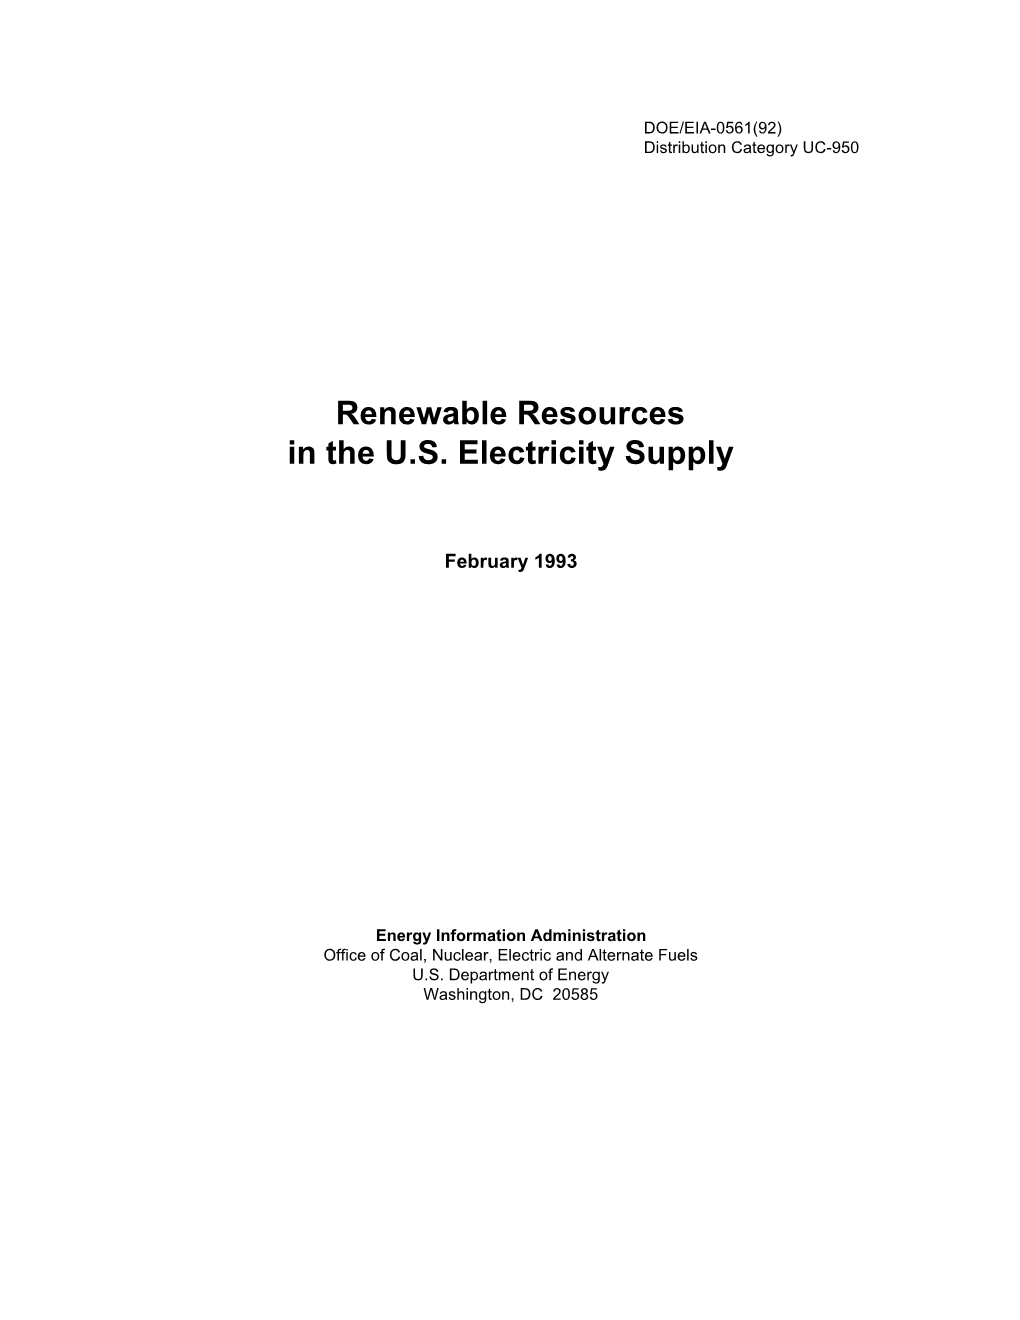 Renewable Resources in the U.S. Electric Supply